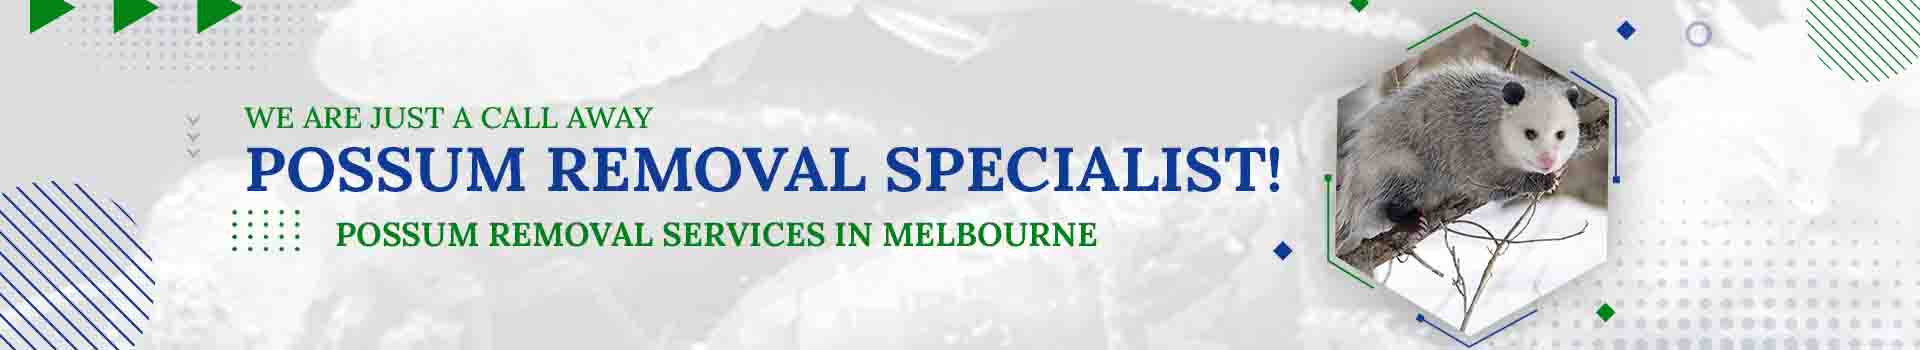 possum removal services in melbourne